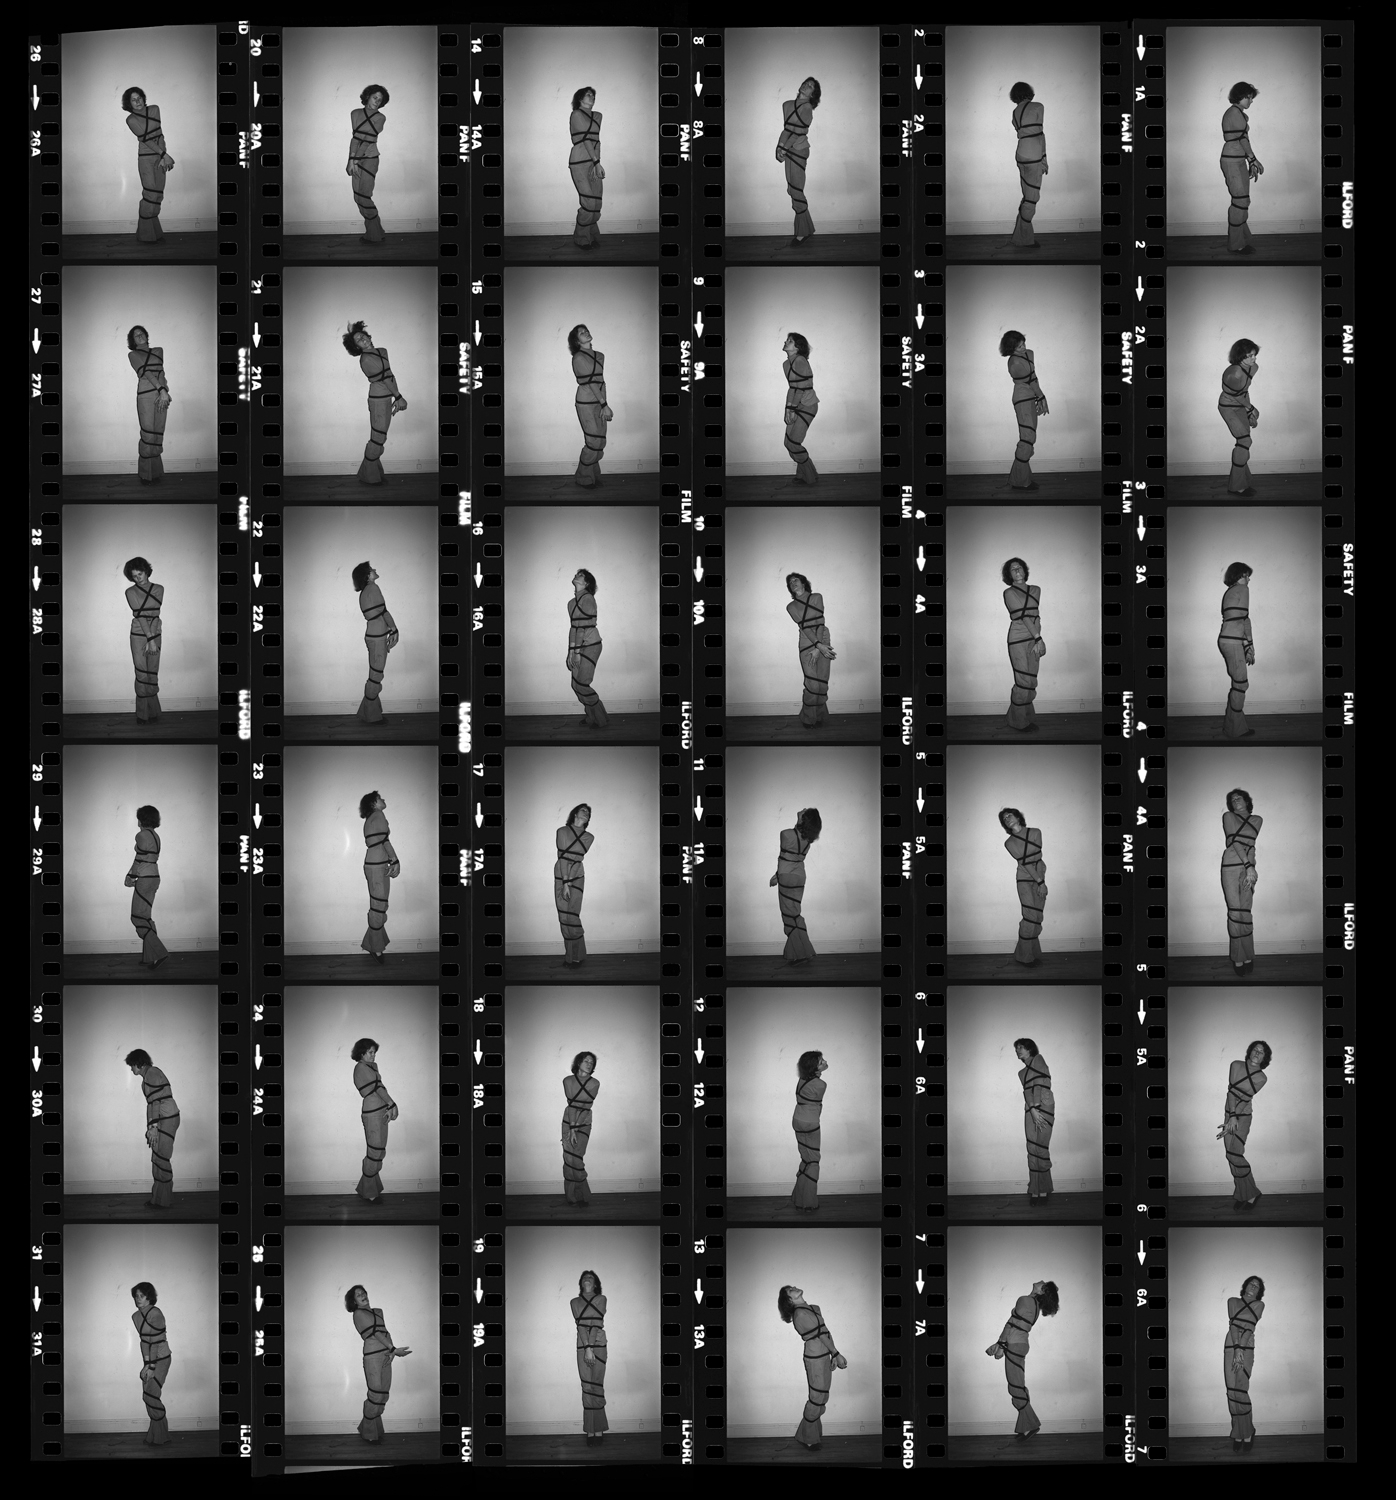     Suzy Lake, ImPositions Pan-F Contact Sheet, 1977/2016, Chromogenic print, 24 × 18&#8243;. Courtesy of Georgia Scherman Projects and the artist.

